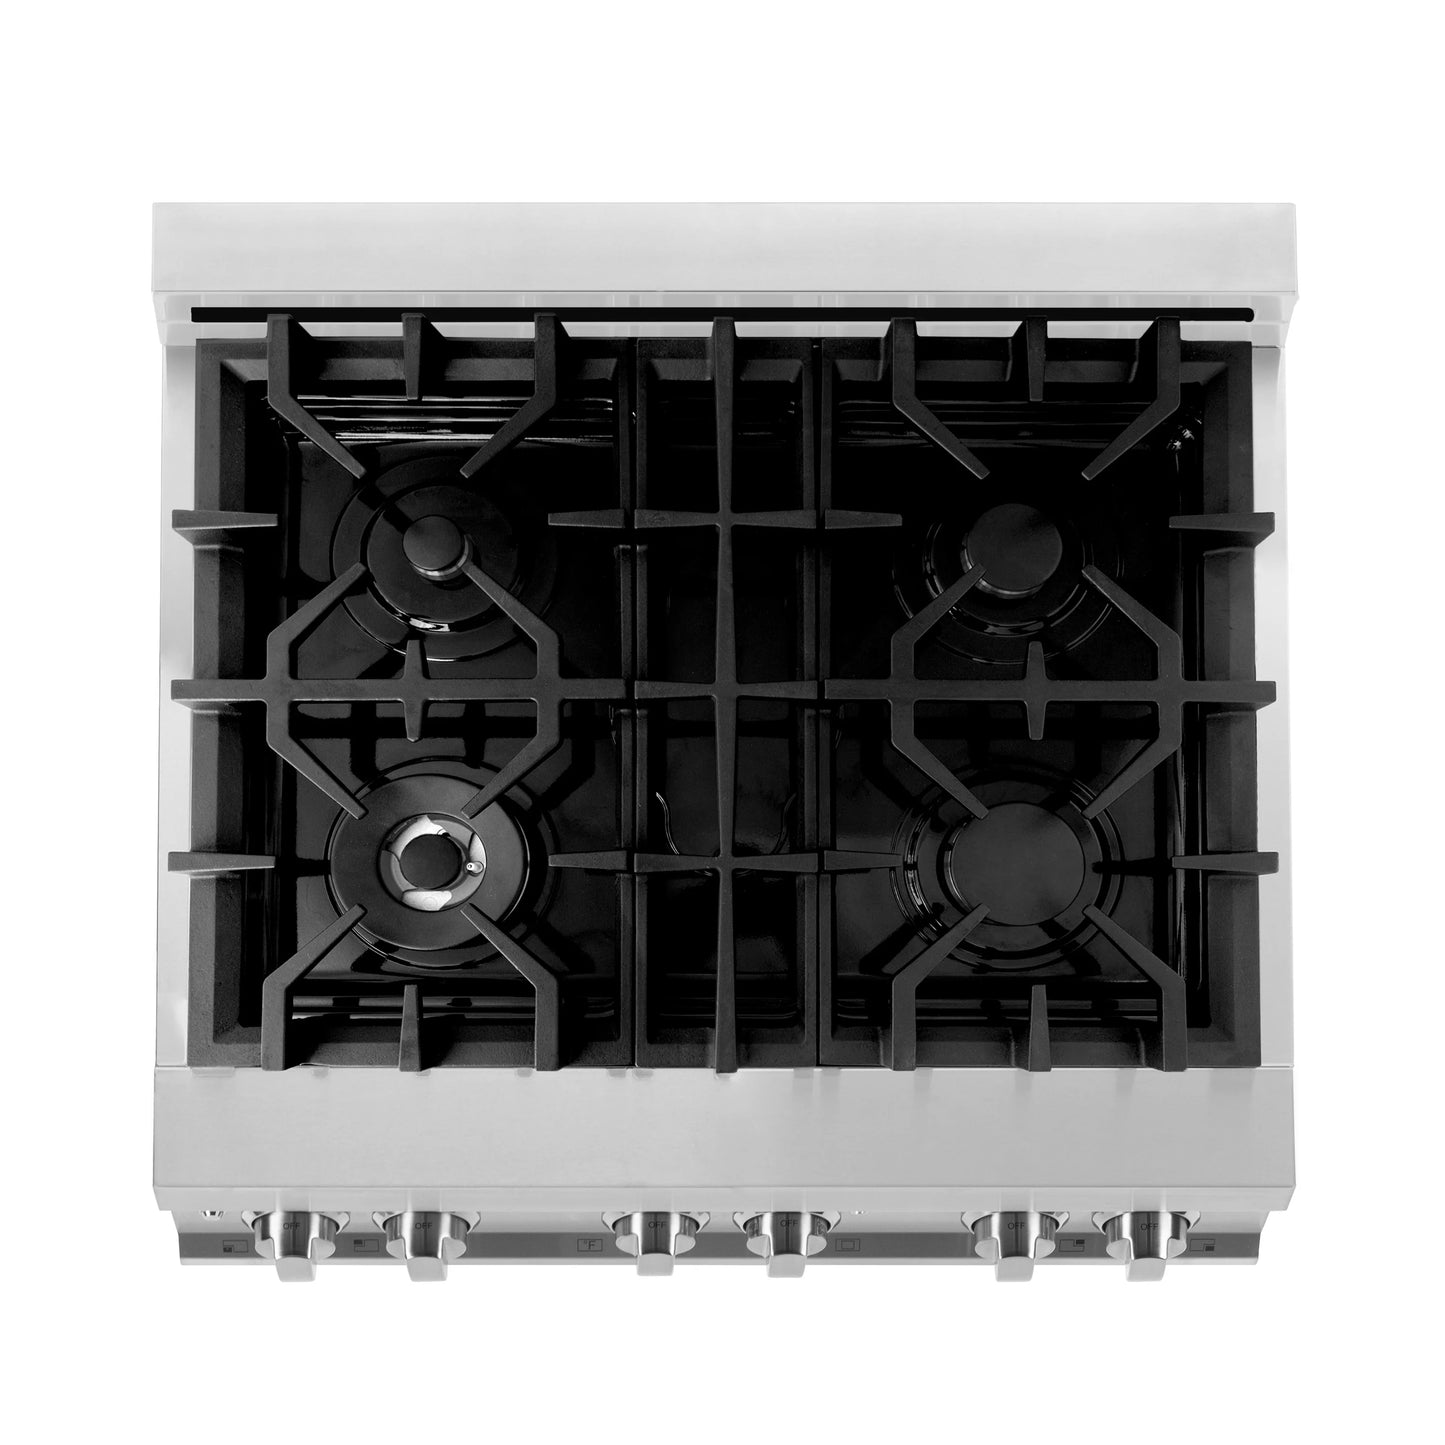 ZLINE 30 in. Dual Fuel Range with Gas Stove and Electric Oven in Stainless Steel with White Matte Door (RA-WM-30)